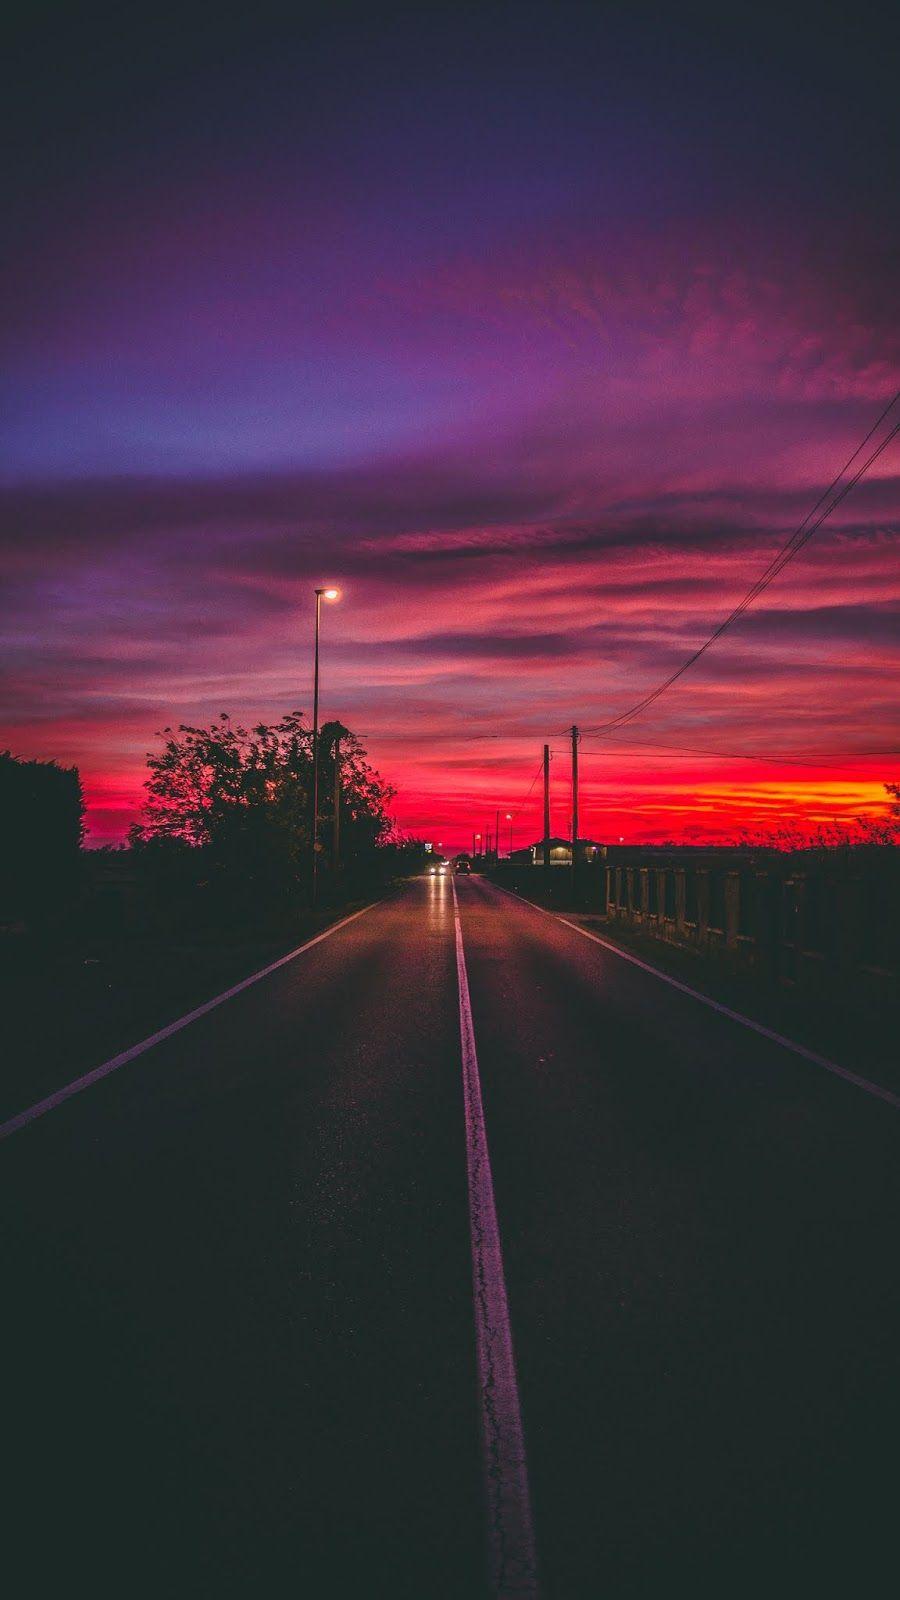 Road in the sunset. Sunset wallpaper, Nature photography, iPhone